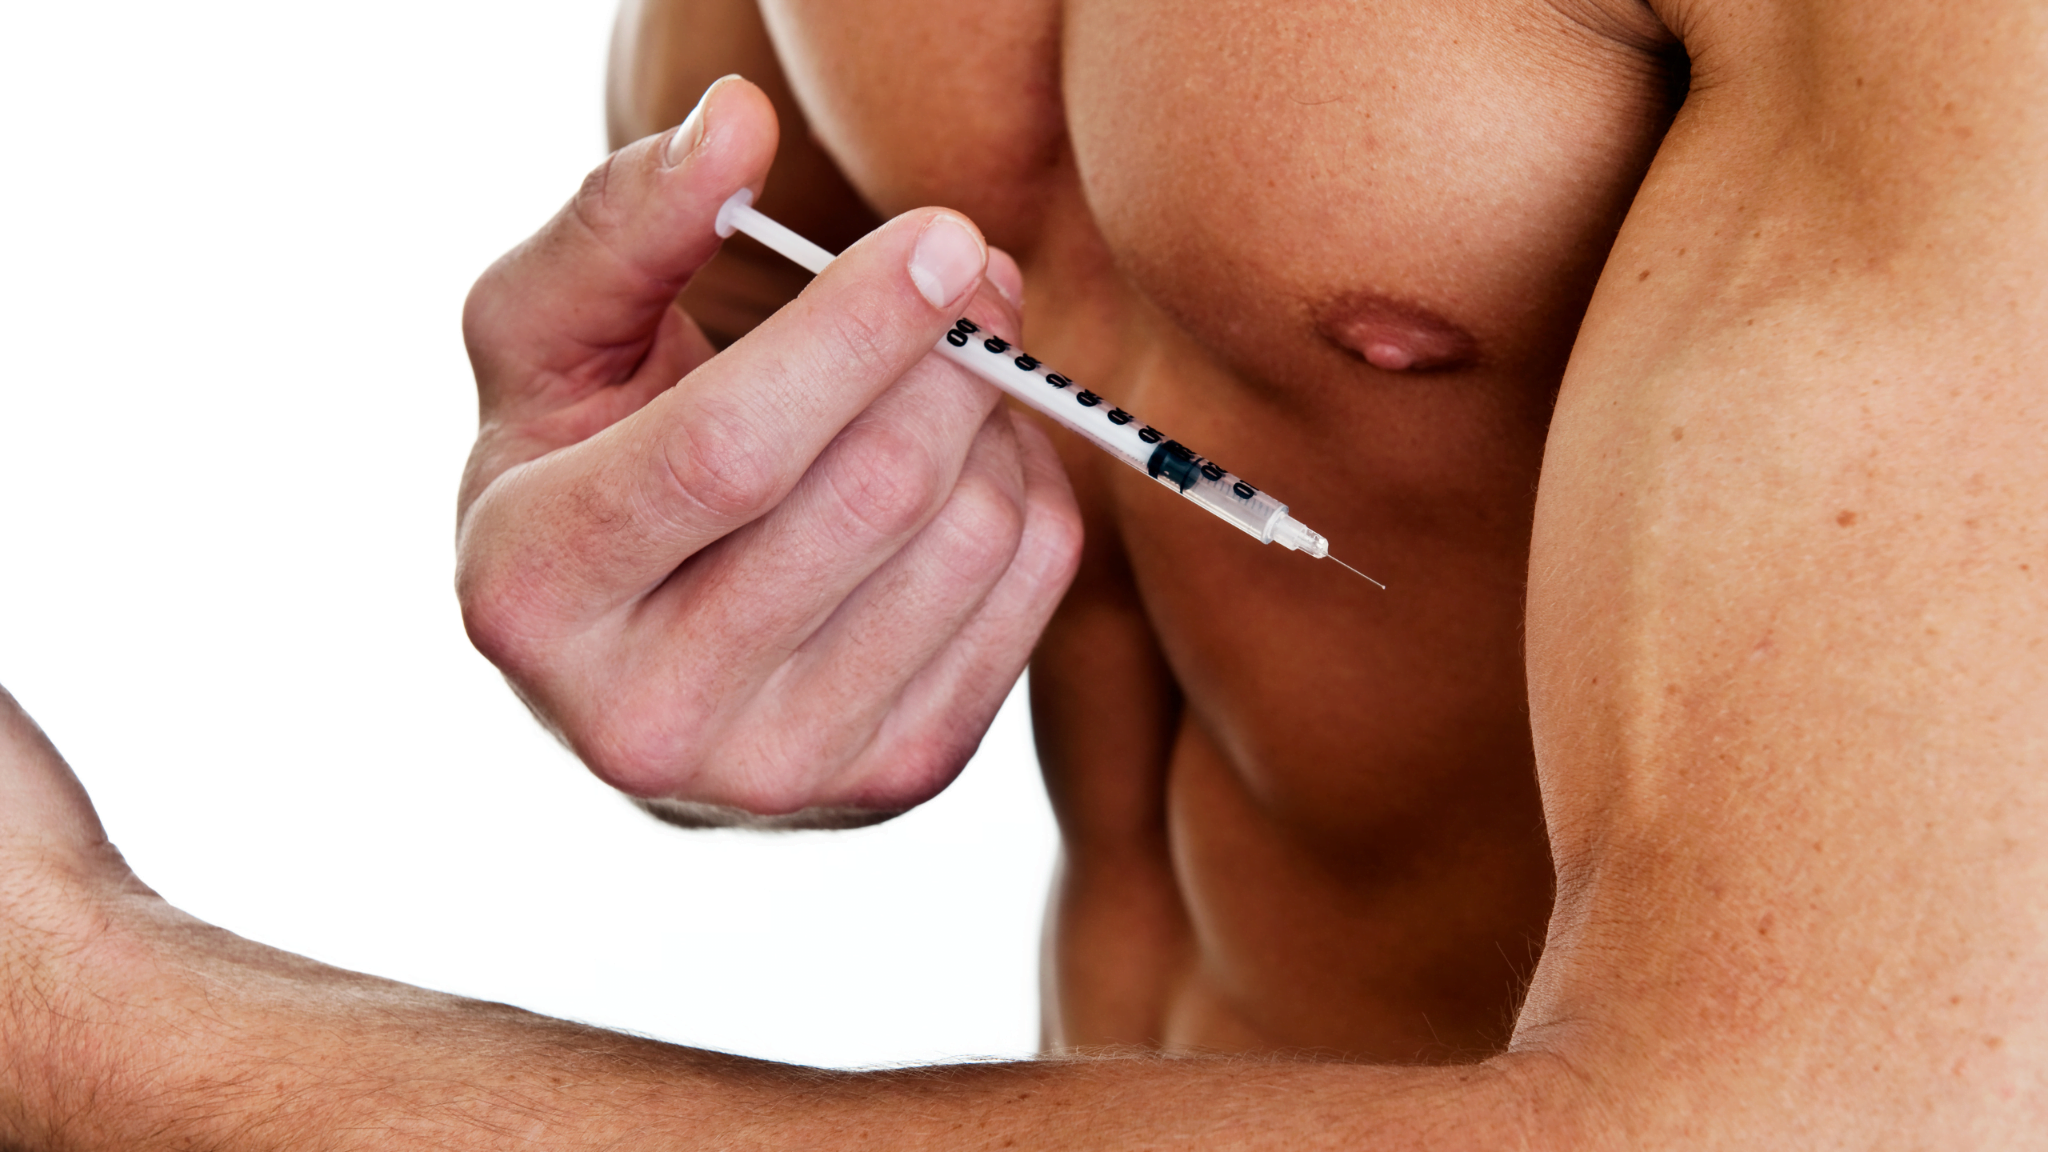 Factors that Influence Cardiovascular Risks of Anabolic Steroid Use